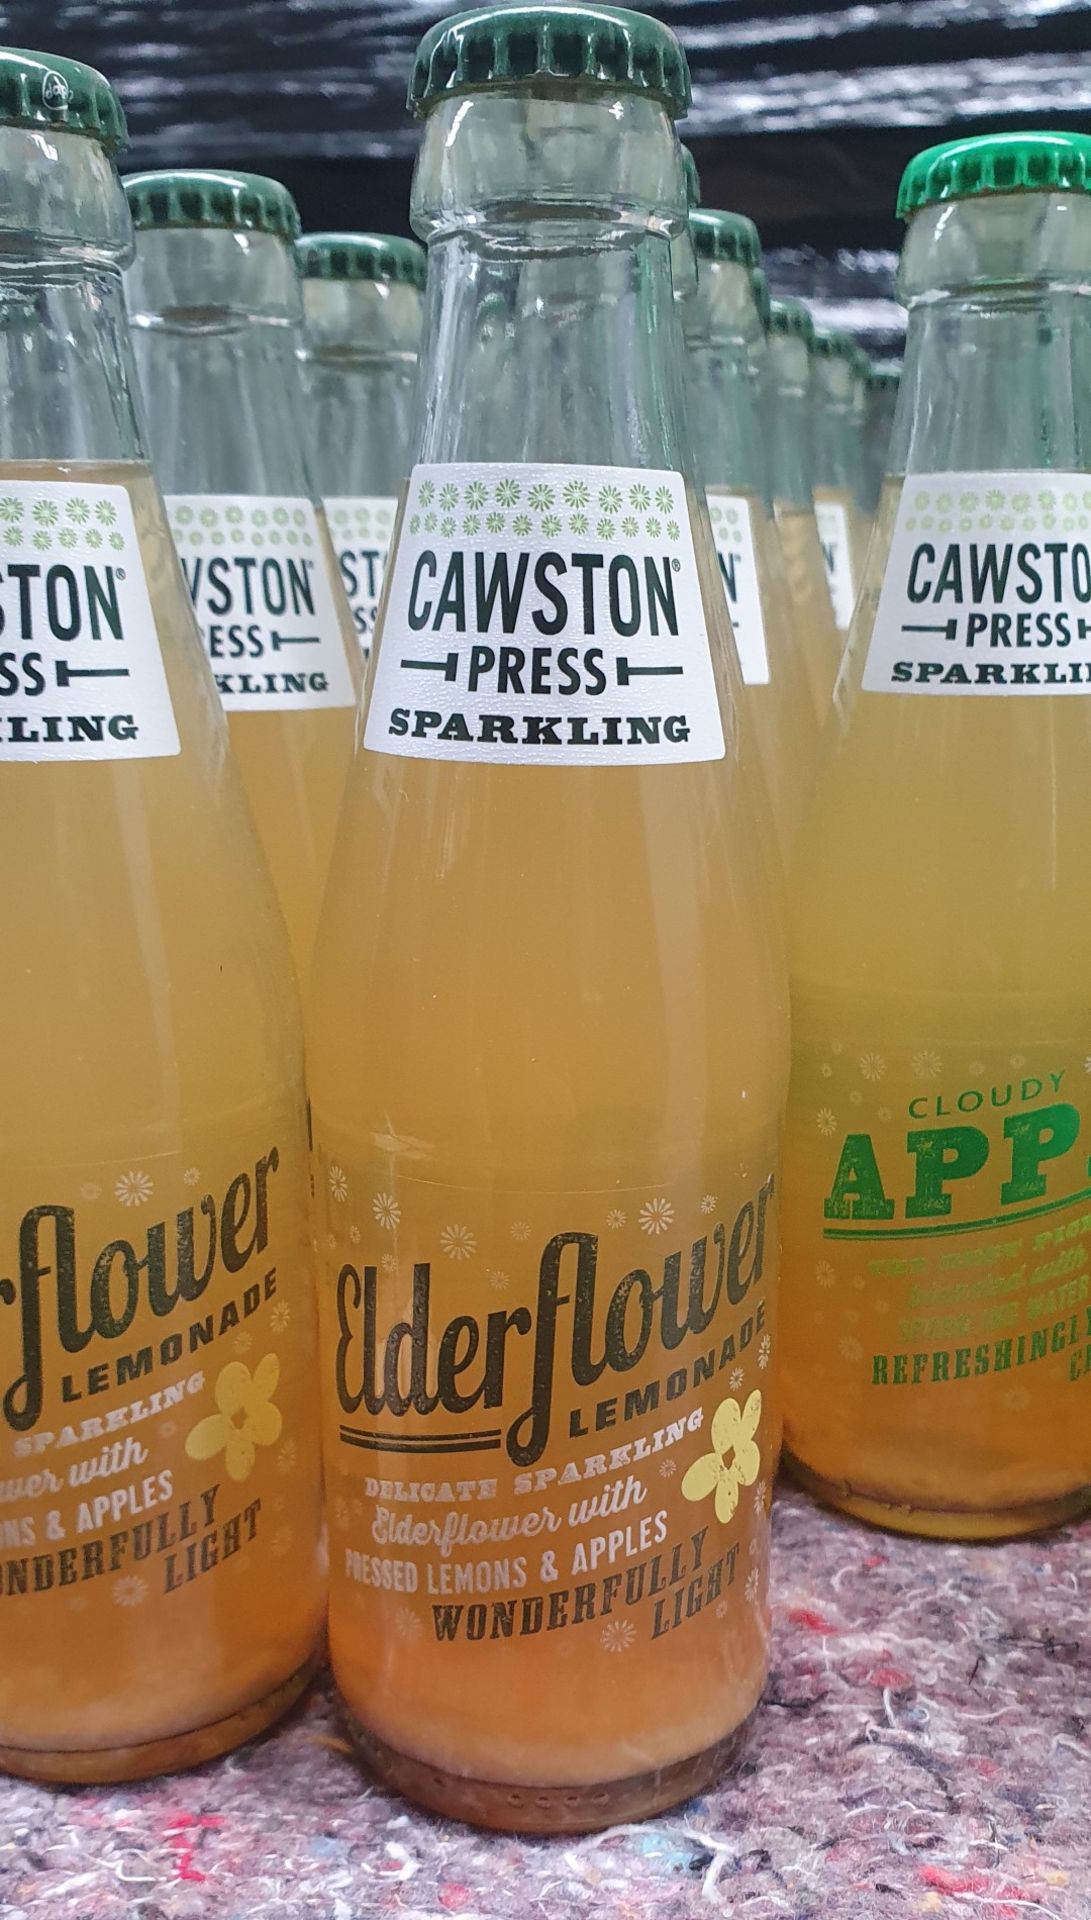 80 x Bottles of Cawston Press 250ml Sparkling Apple and Lemonade Drinks - Ref: TCH218 - CL840 - - Image 2 of 7